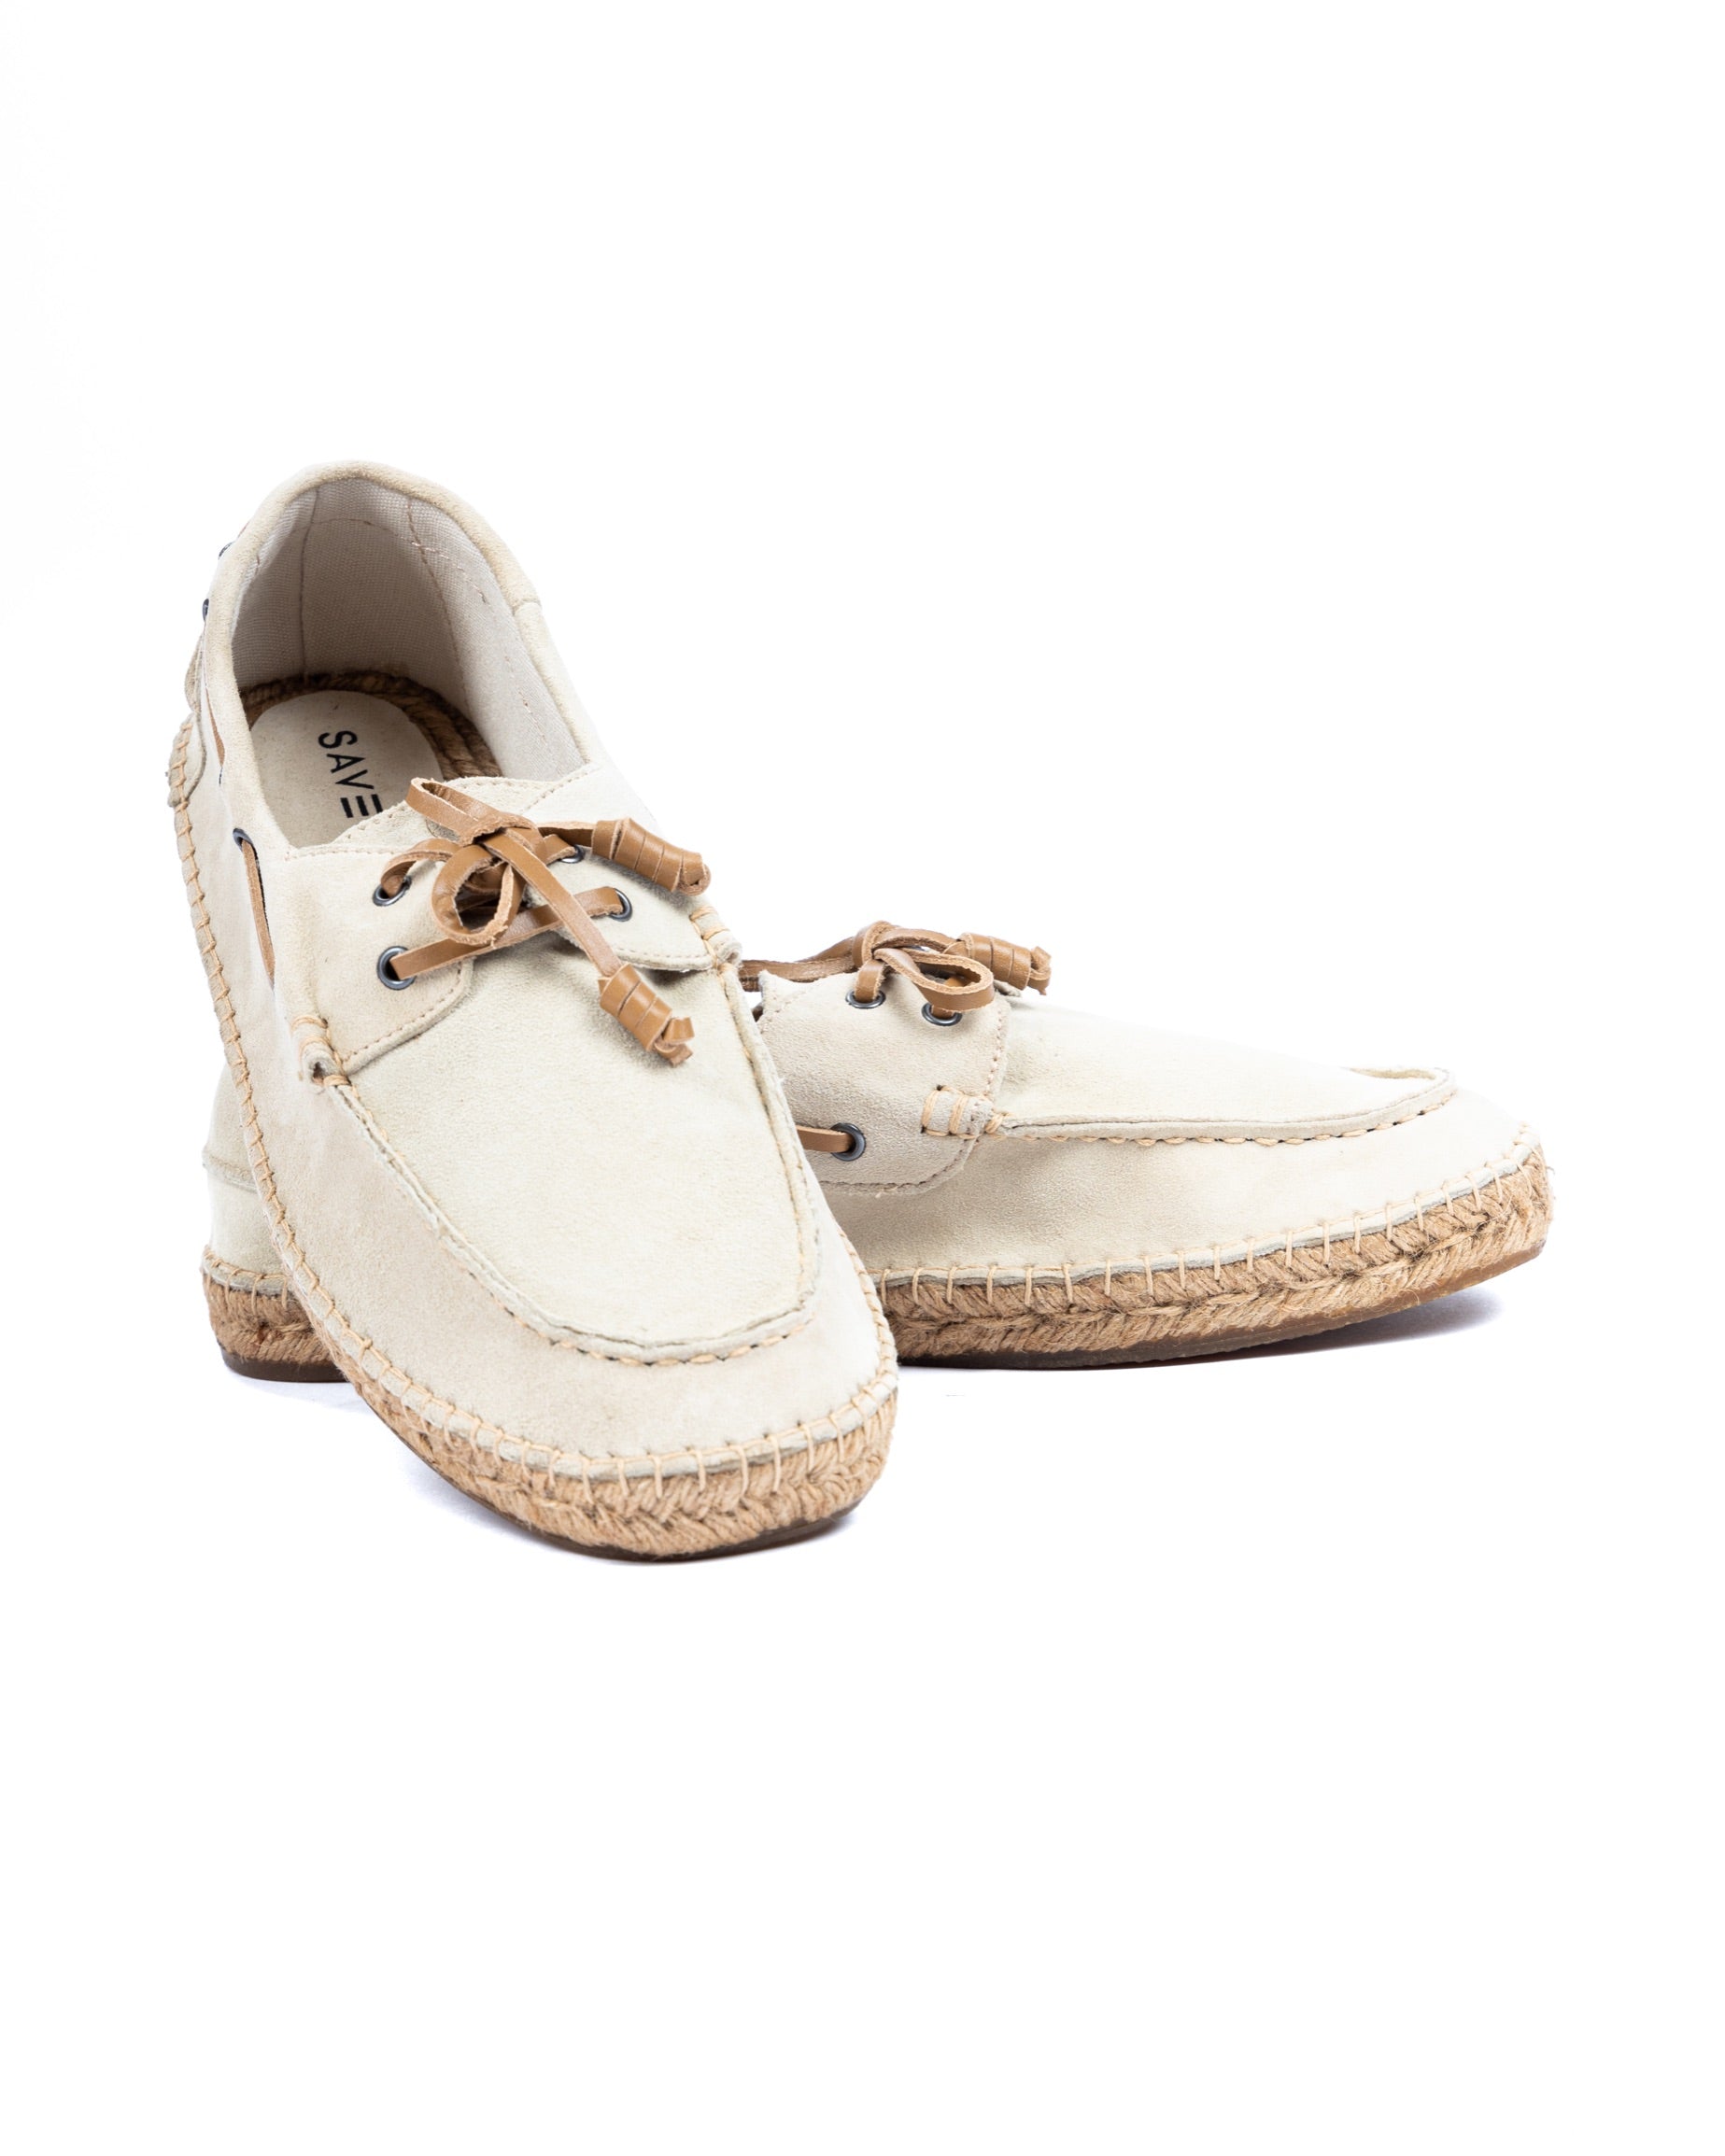 Pompeii - cream suede boat with rope bottom